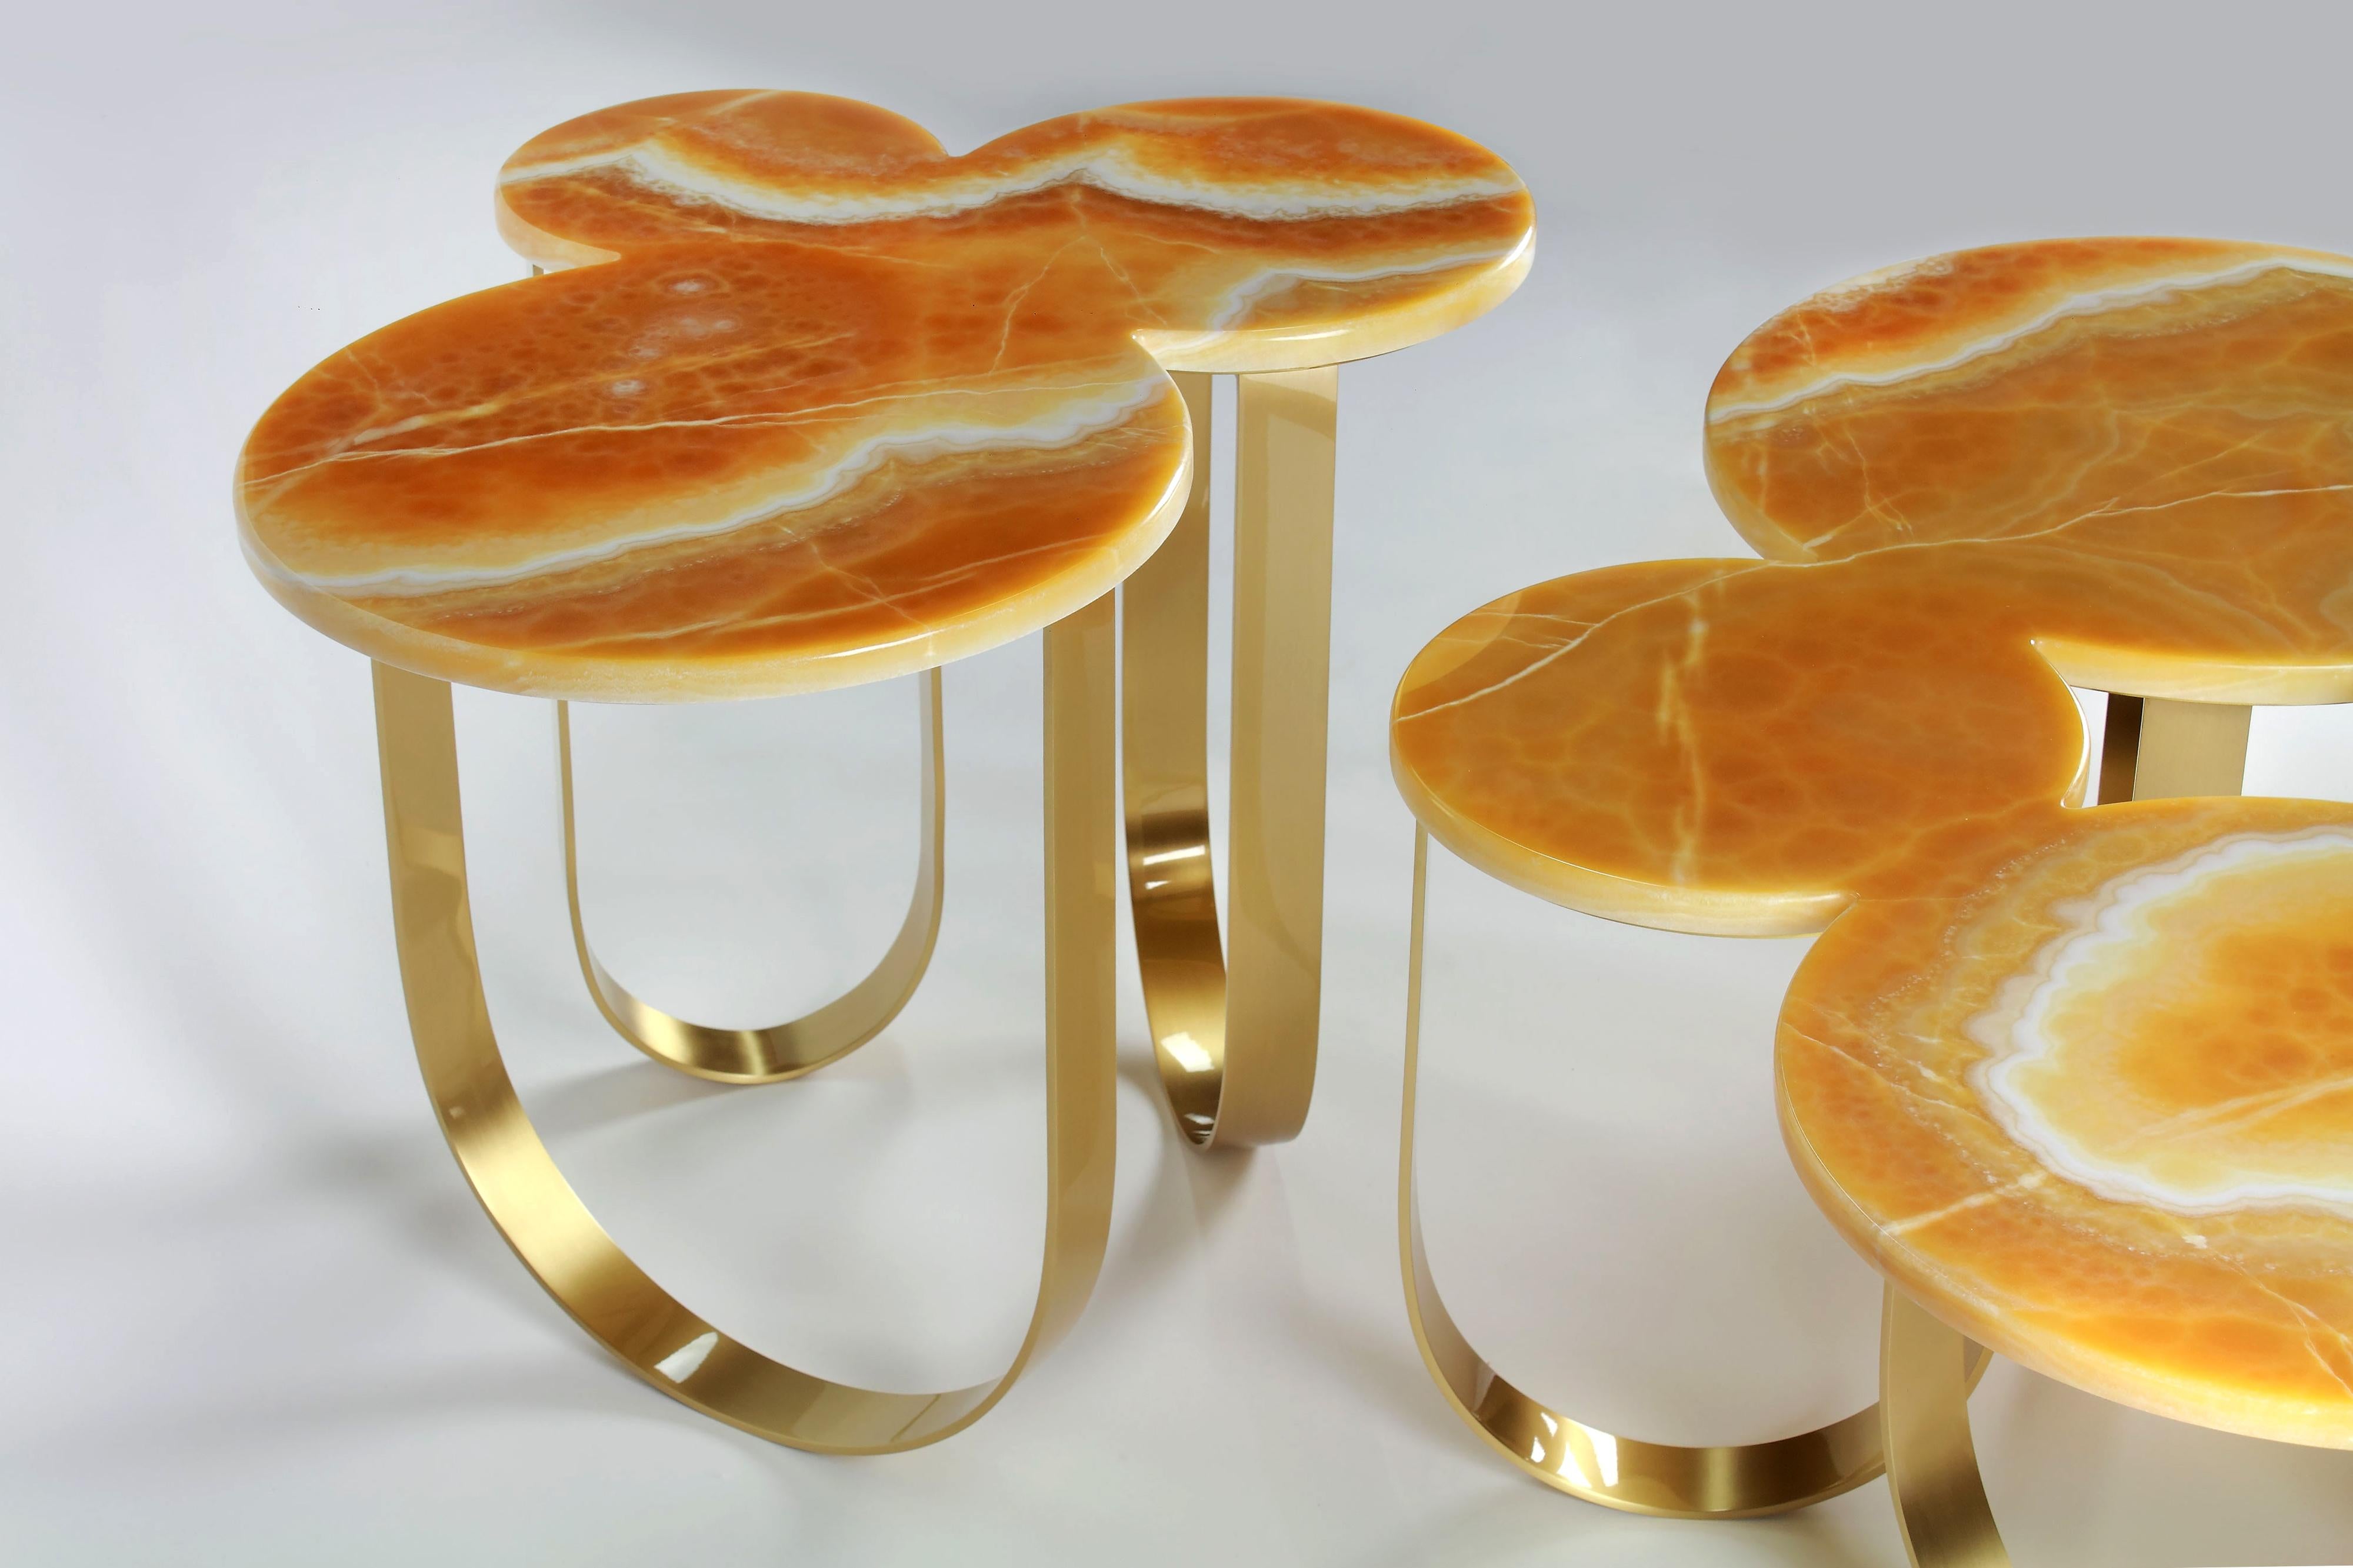 Side or End Table Organic Shape Orange Onyx Brass Collectible Design Italy In New Condition For Sale In Ancona, Marche